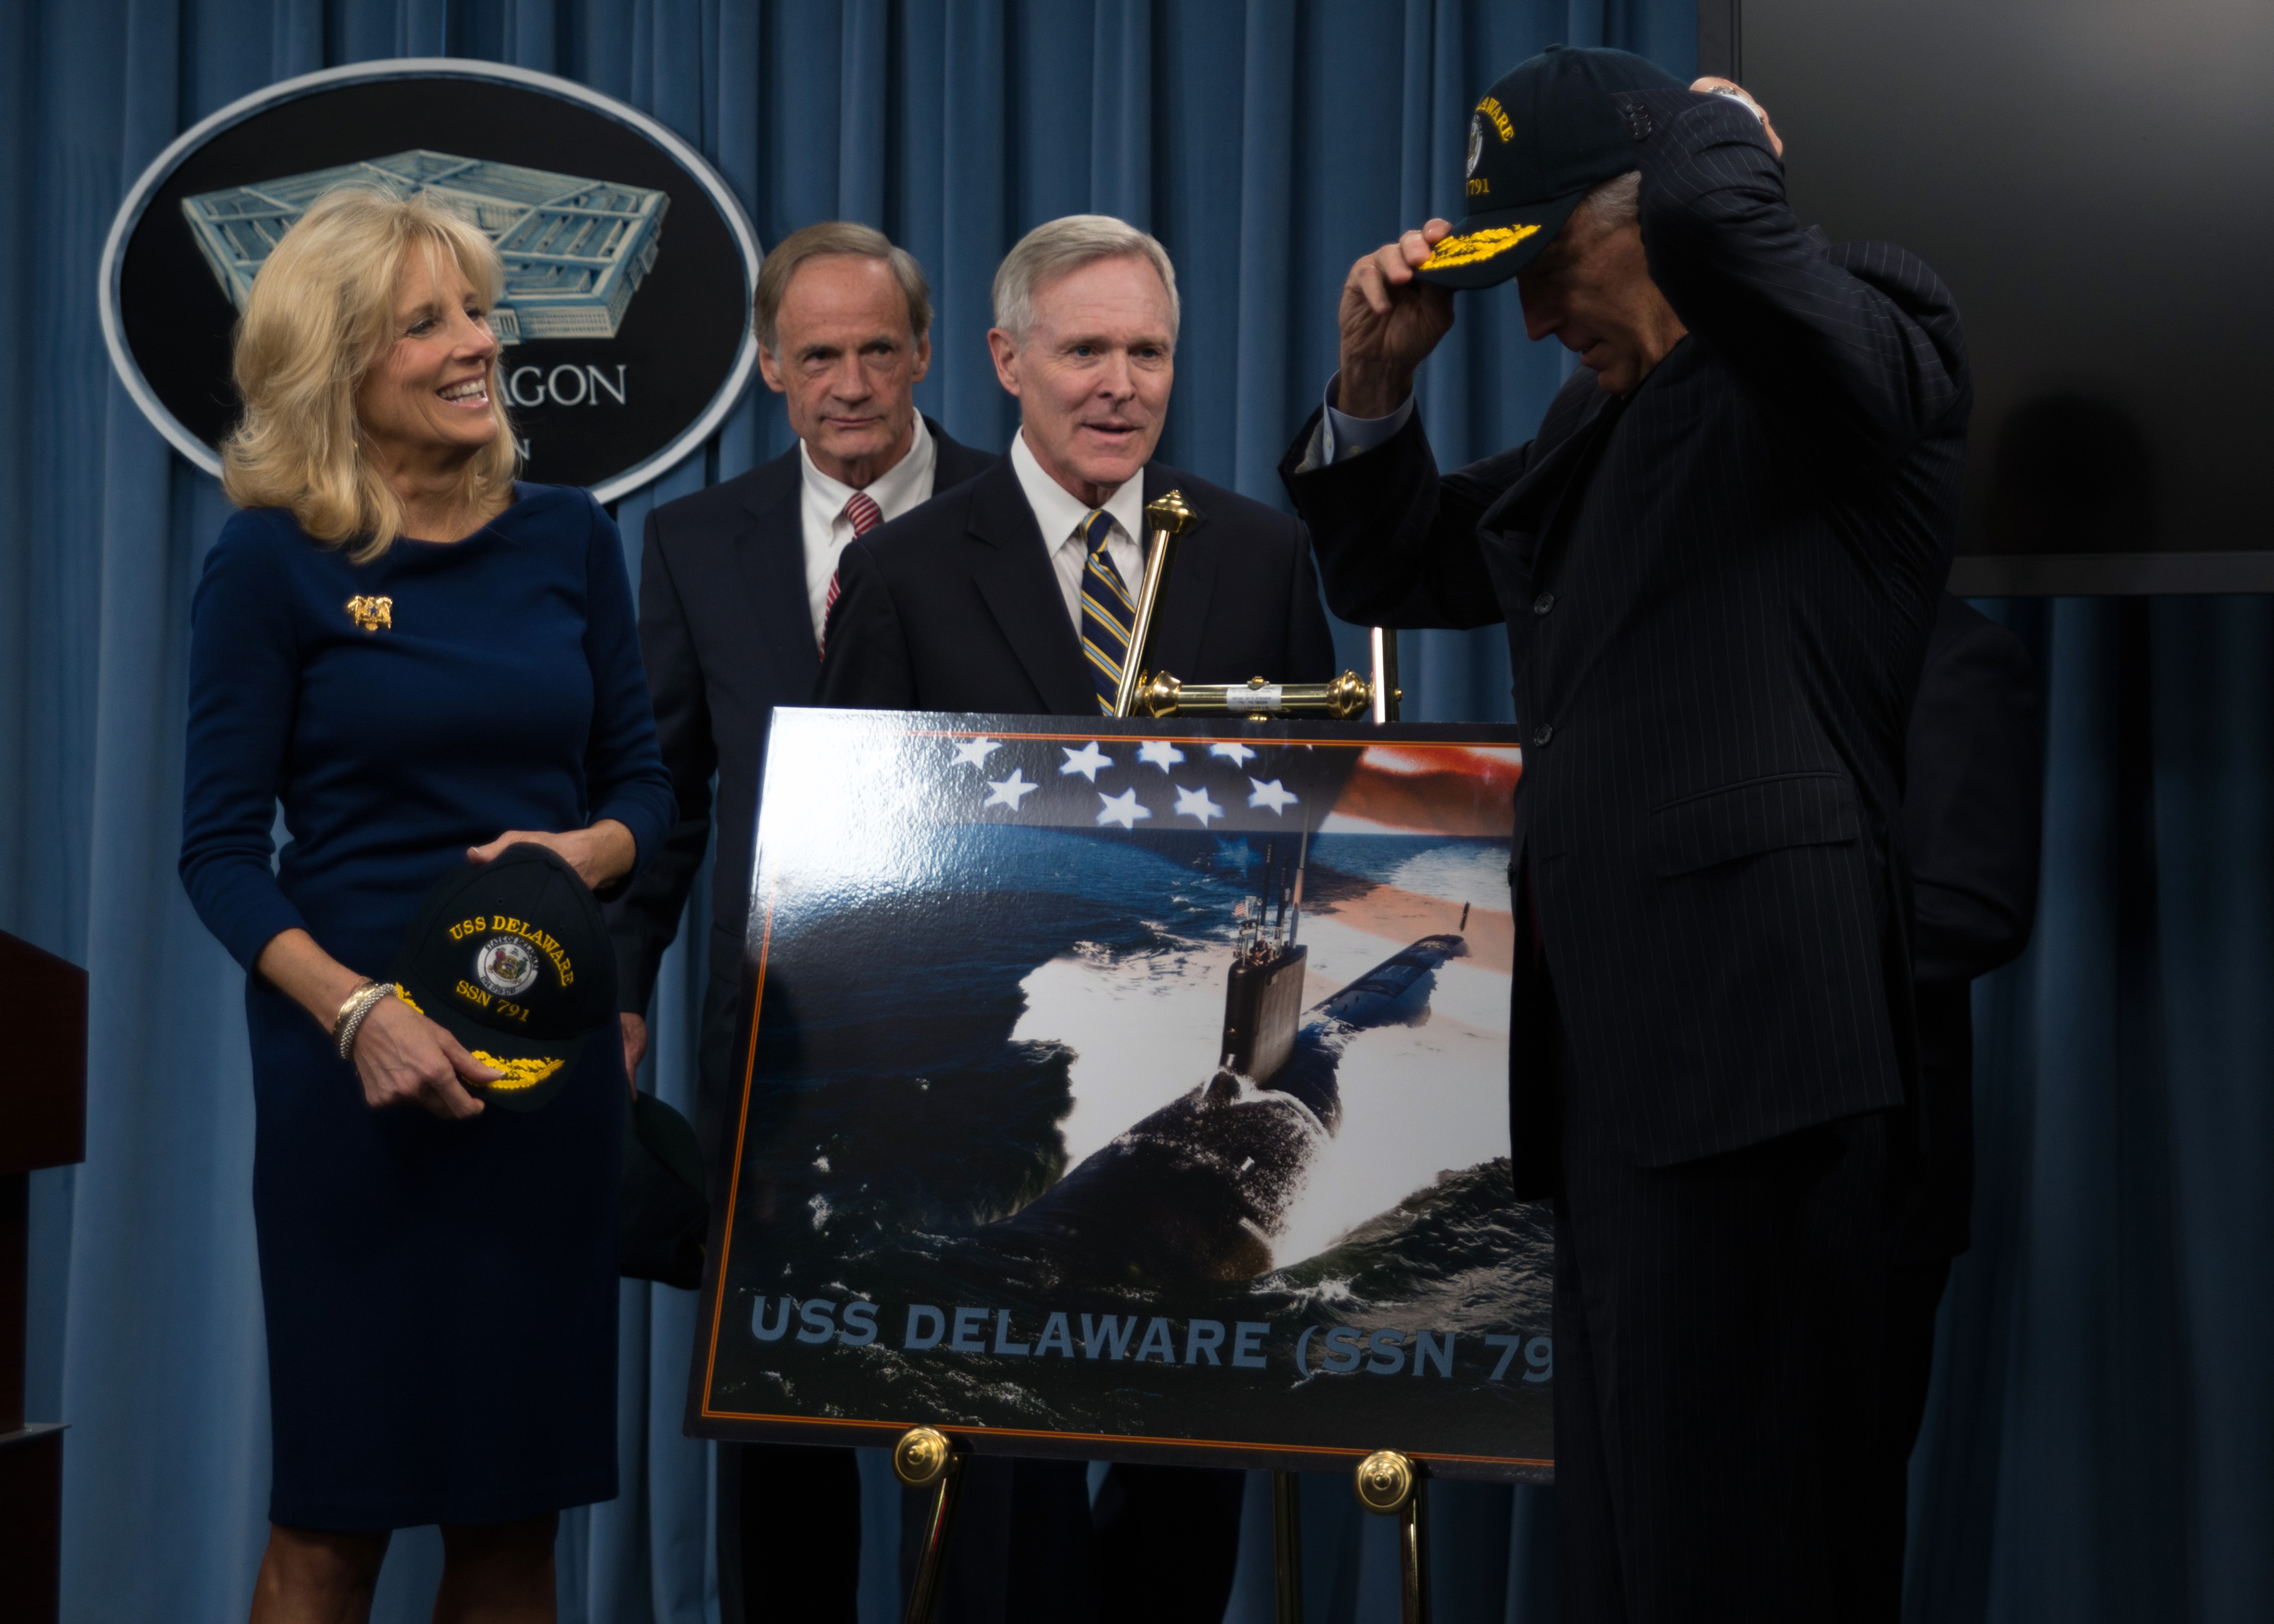 Secretary of the Navy Ray Mabus and ship's sponsor, Dr. Jill Biden, watch as Vice President Joe Biden puts on a USS Delaware ball cap at the Pentagon announcing the name the future Virginia-class attack submarine USS Delaware (SSN 791) on Nov. 19, 2012. US Navy Photo